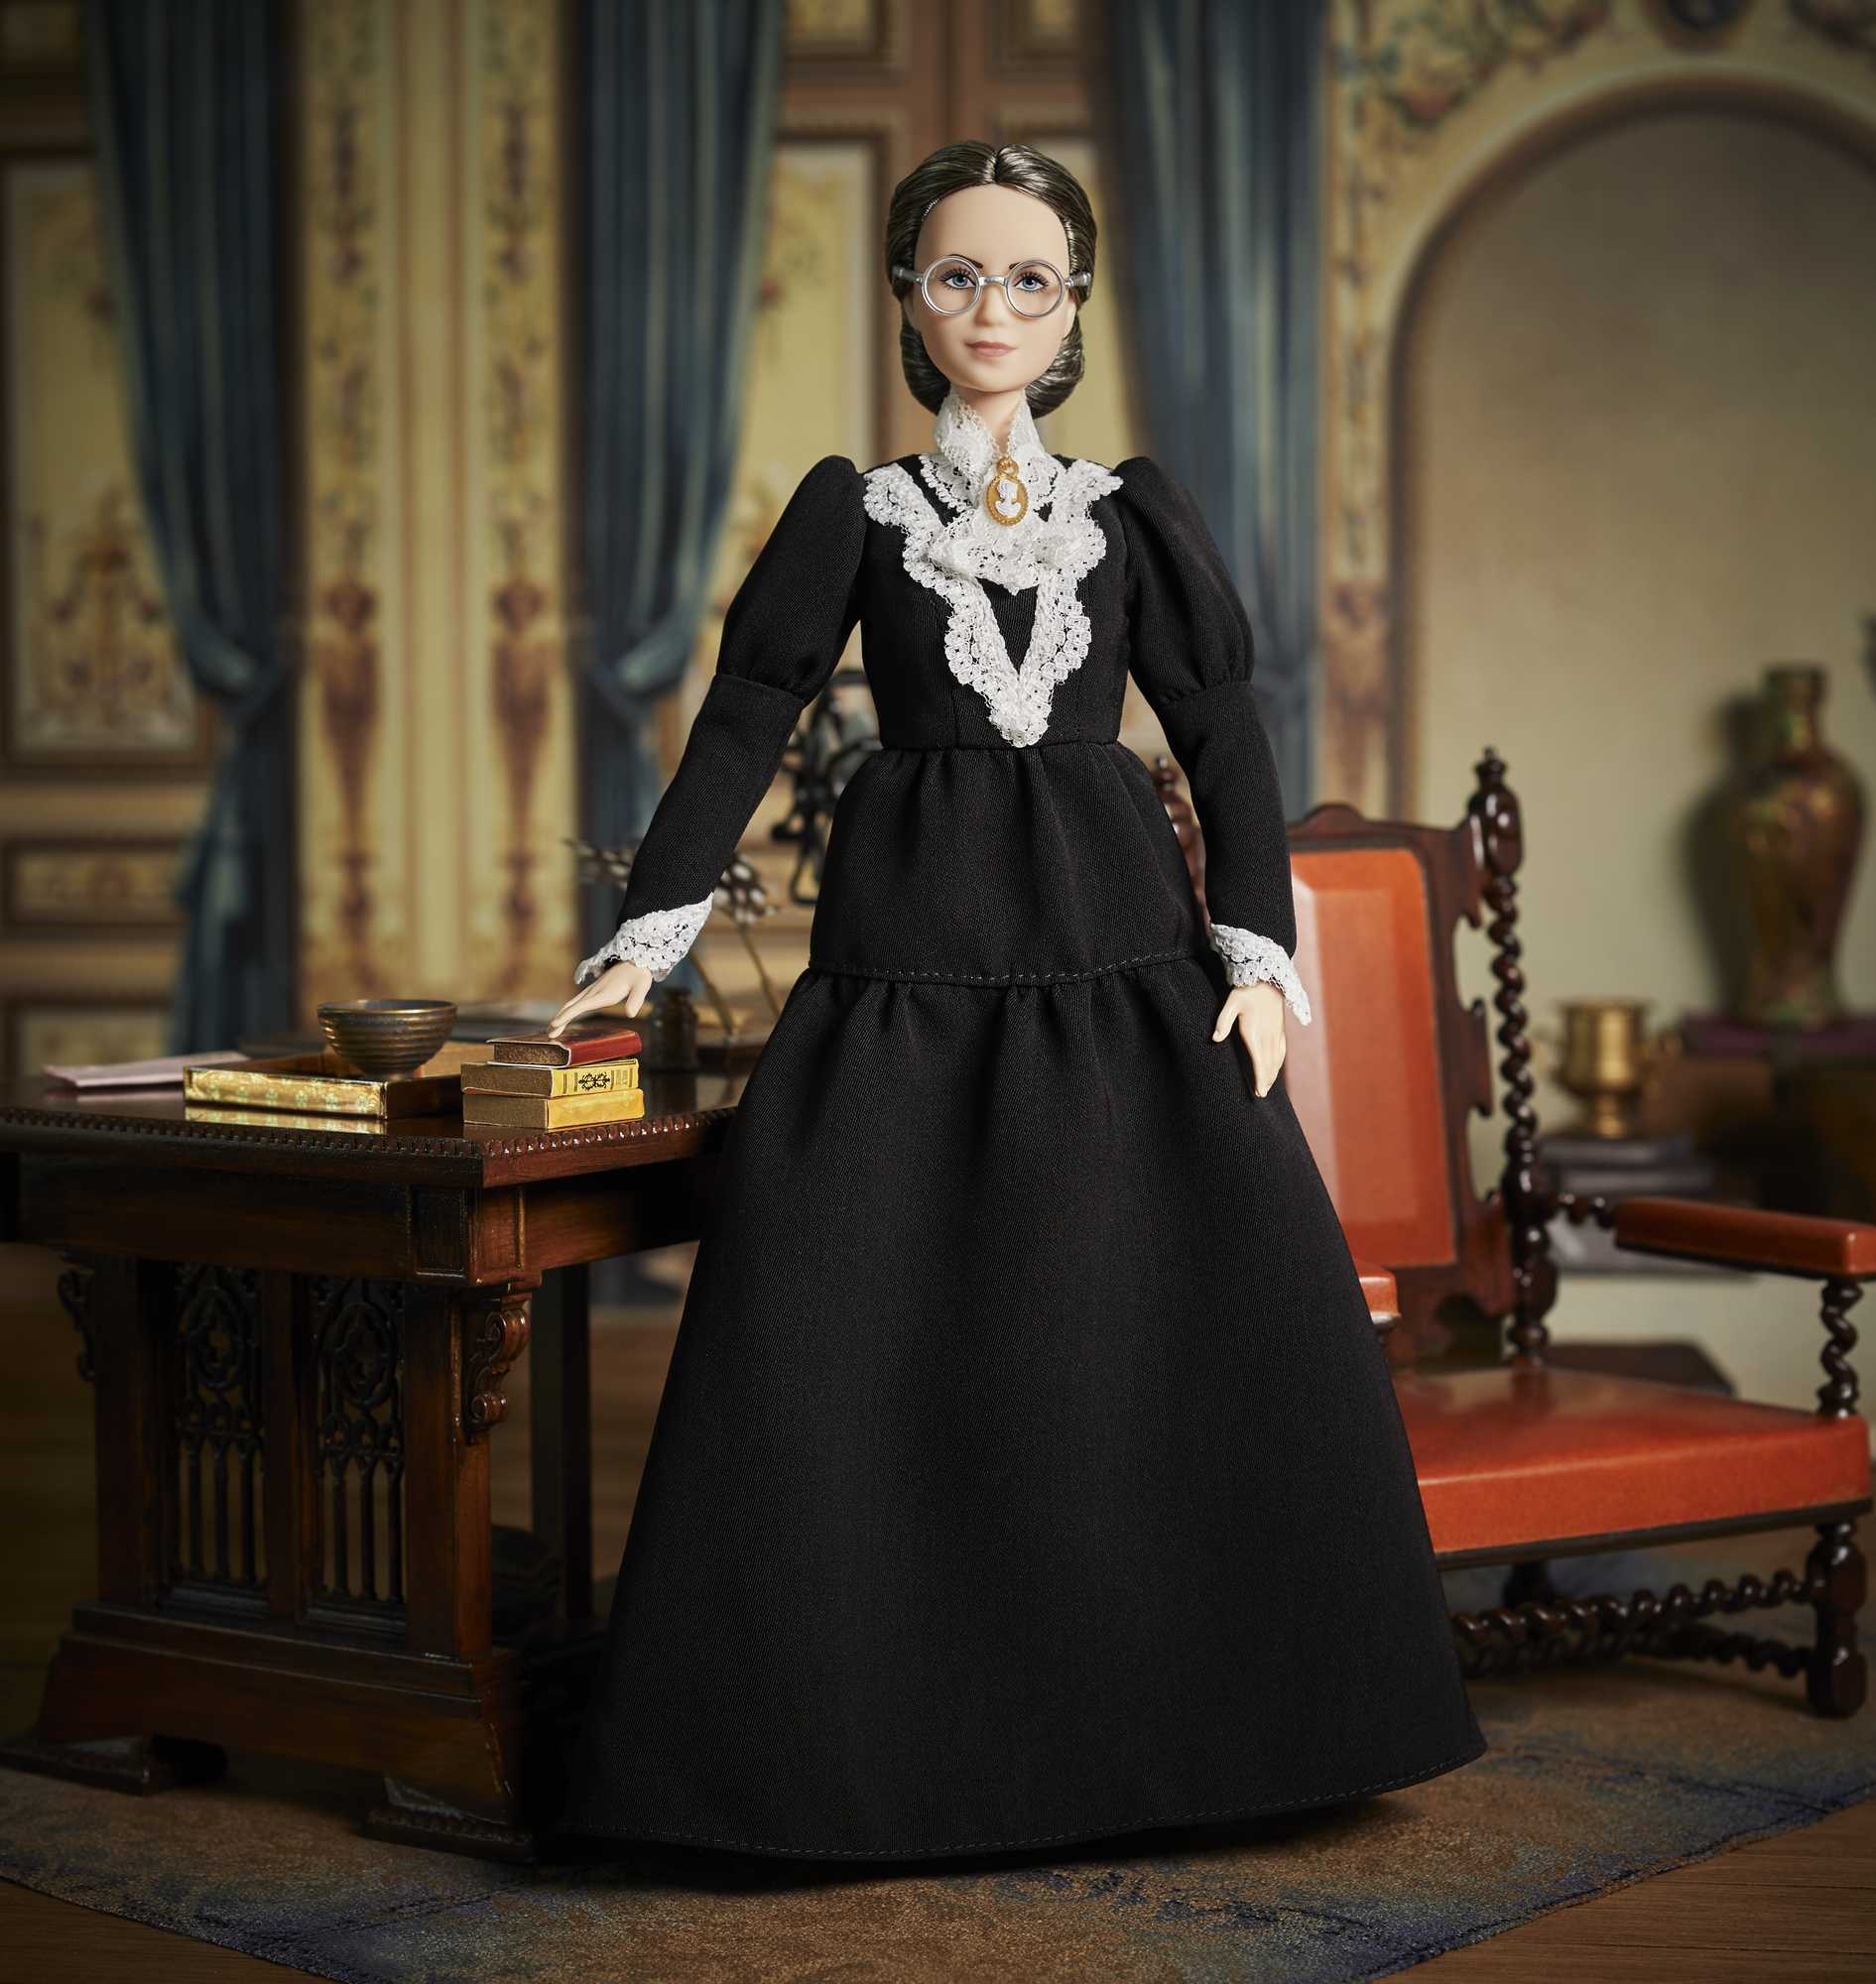 Barbie Inspiring Women Susan B. Anthony Collectible Doll in Black Dress with Doll Stand - image 3 of 7